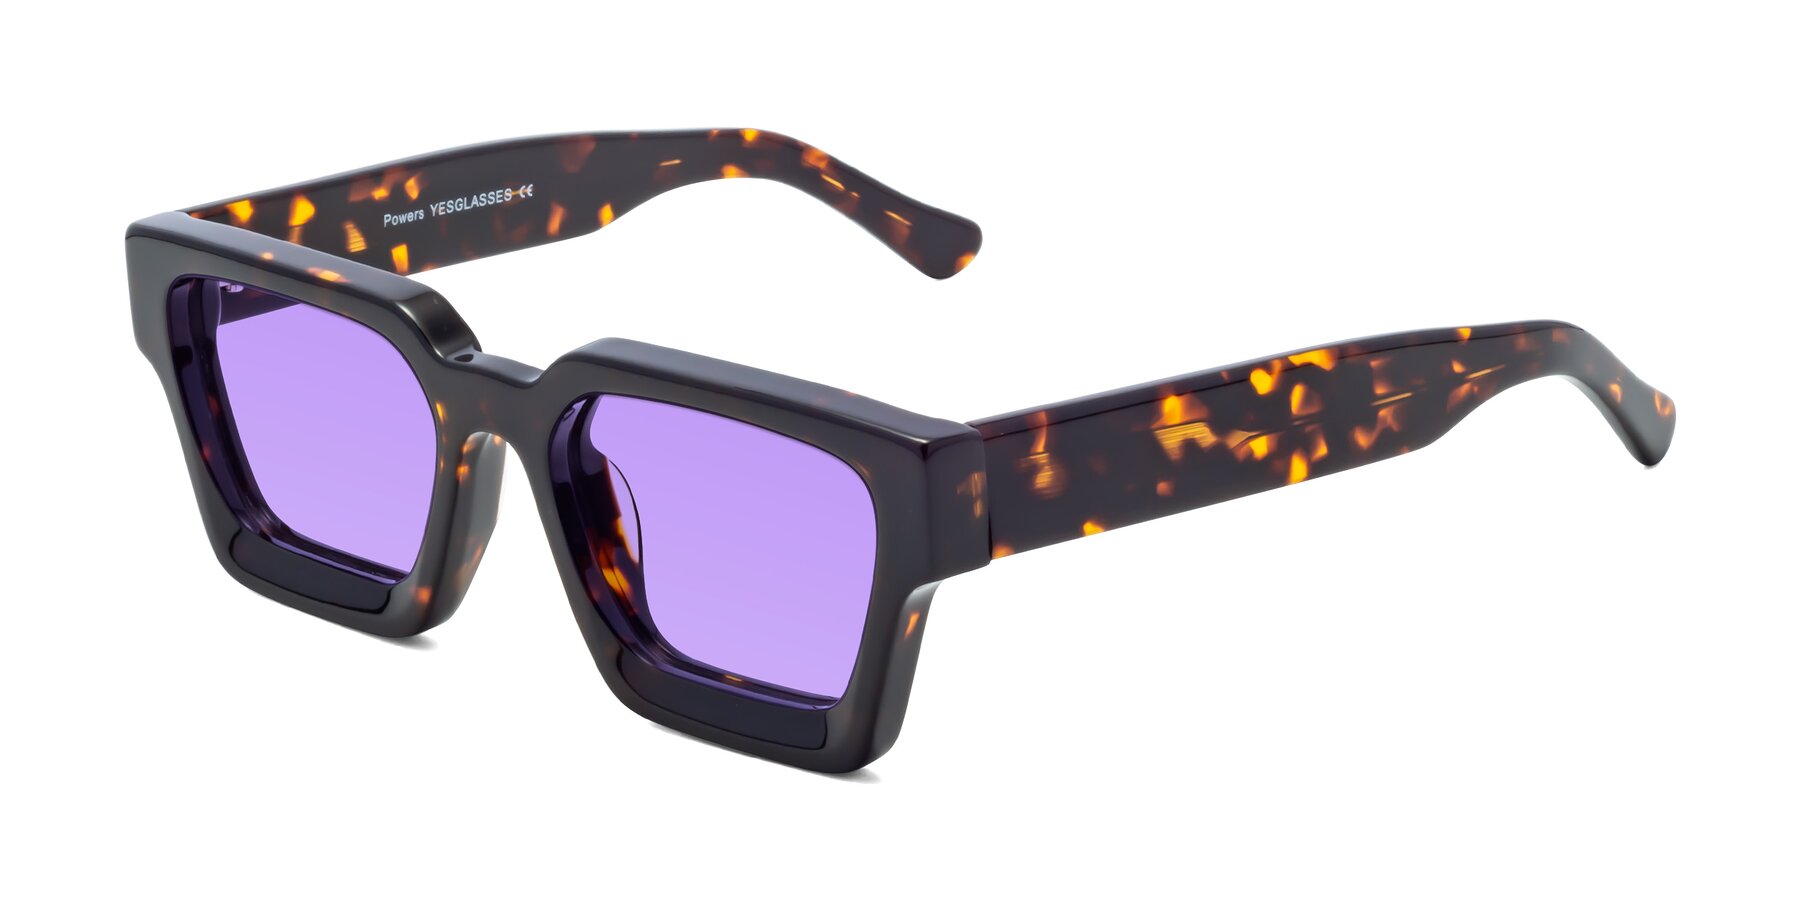 Angle of Powers in Tortoise with Medium Purple Tinted Lenses